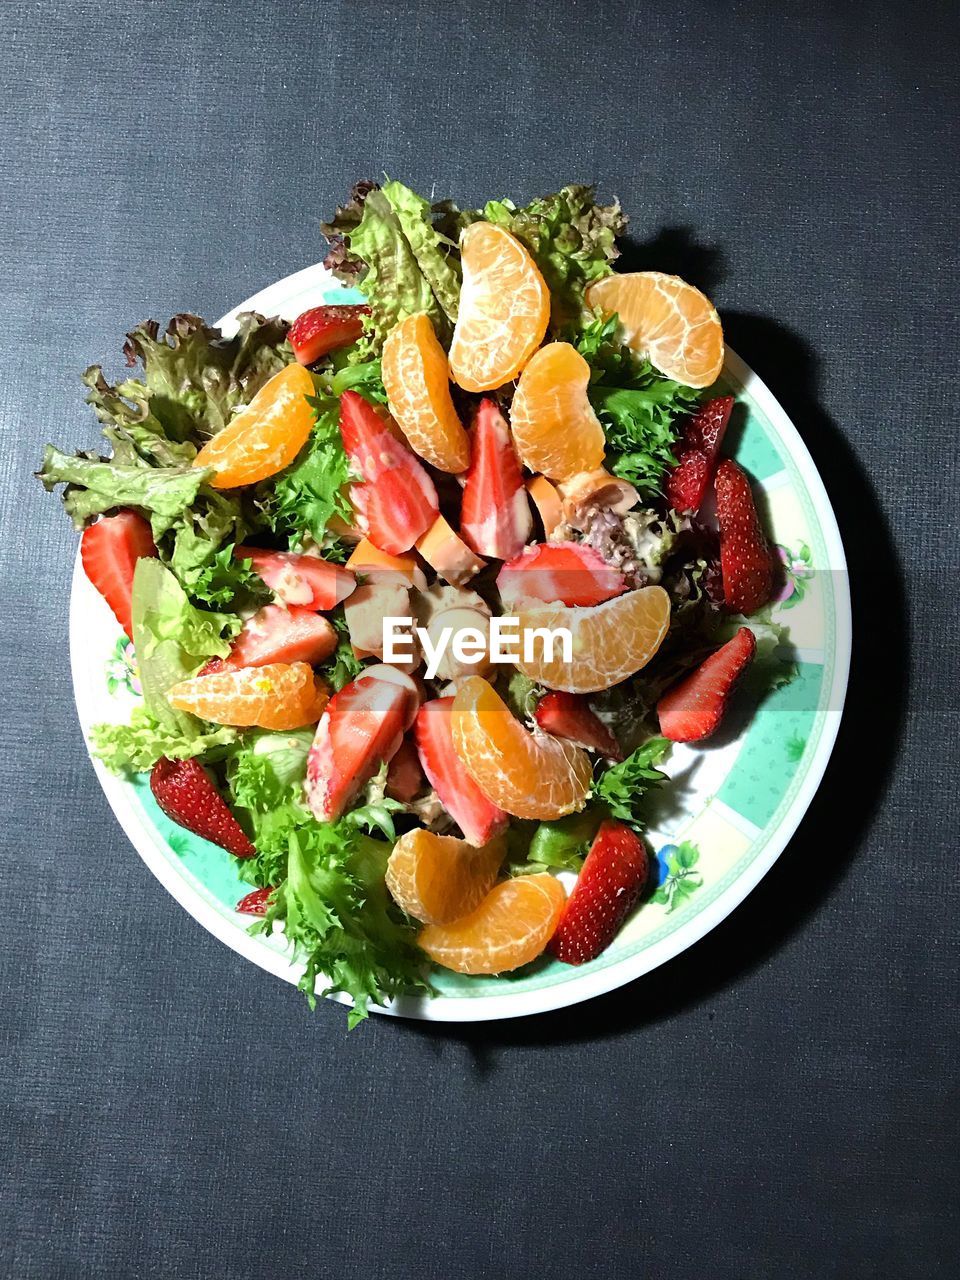 DIRECTLY ABOVE SHOT OF VEGETABLES IN PLATE